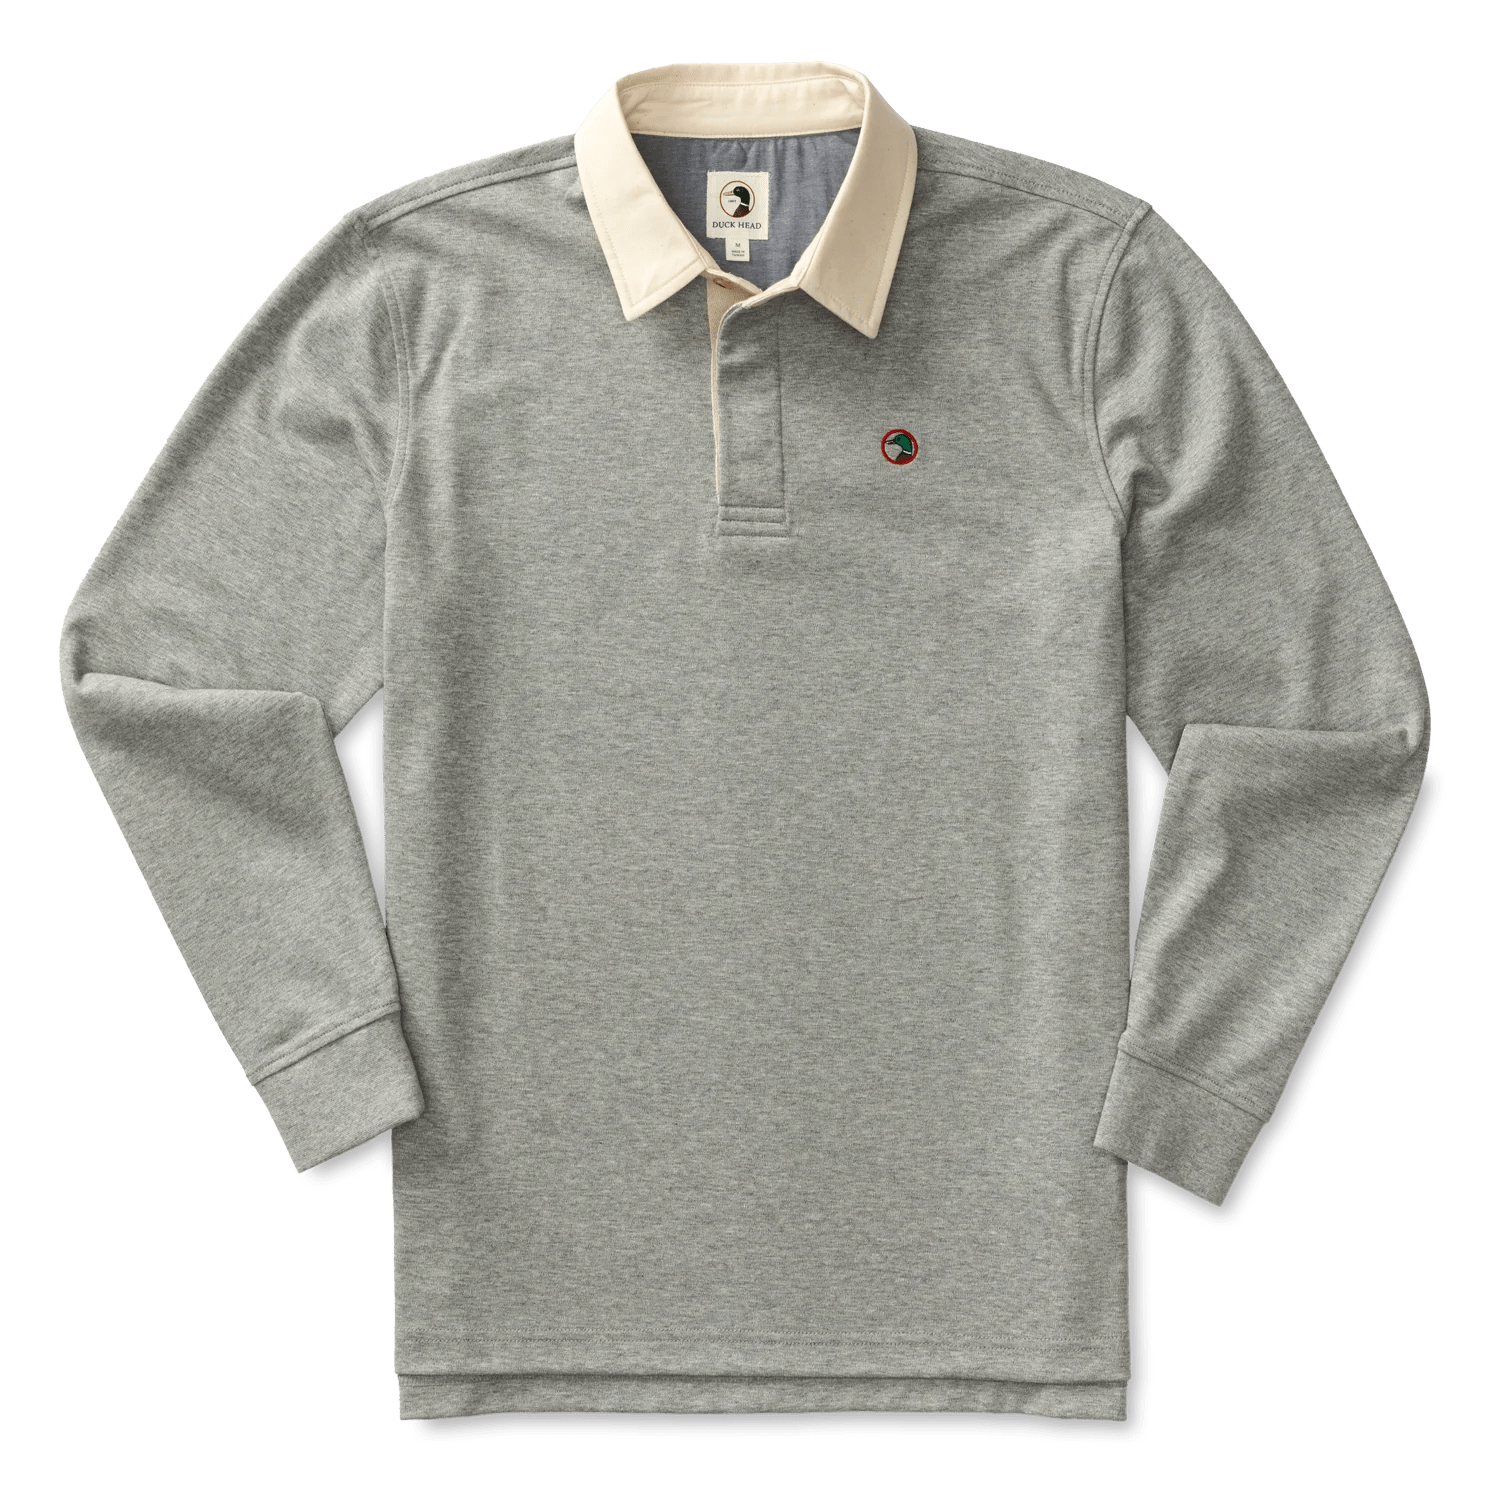 The Iconic Rugby Shirt for Men